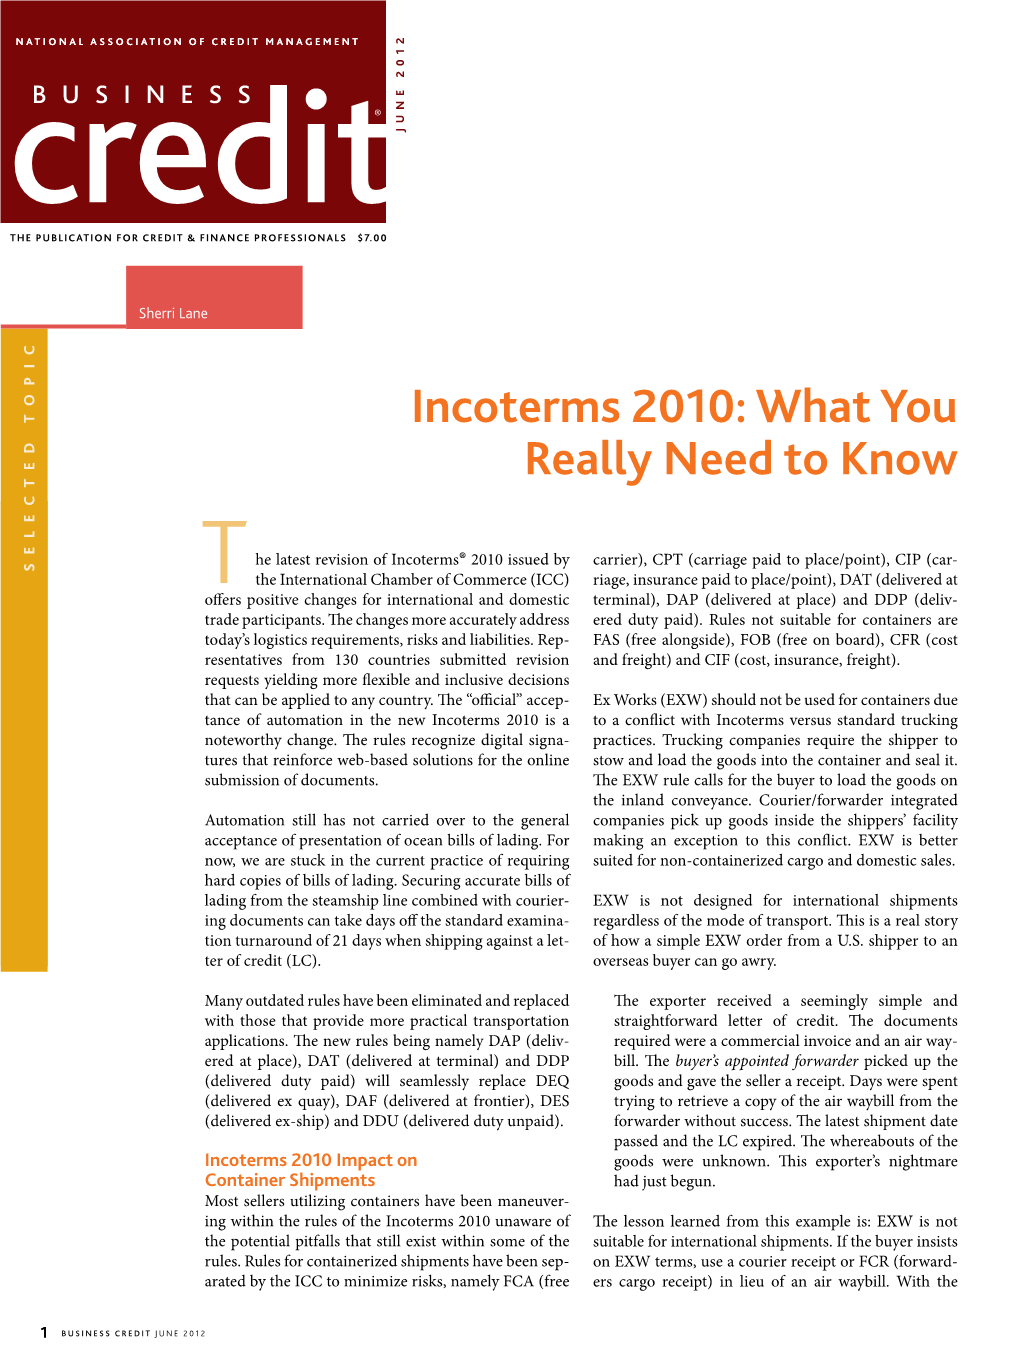 Incoterms 2010: What You